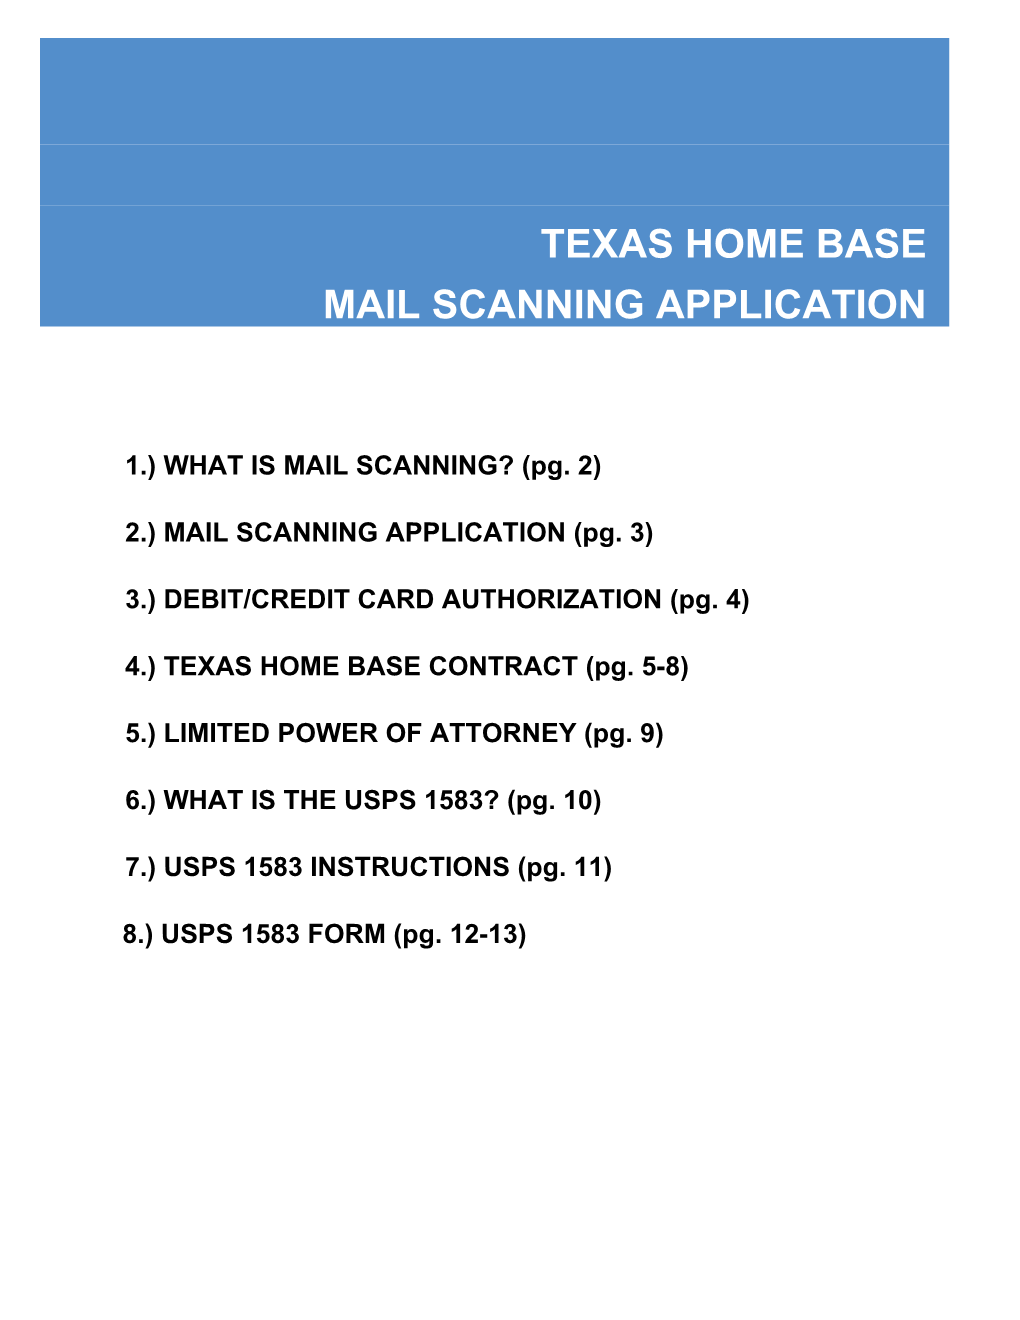 Mail Scanning Application